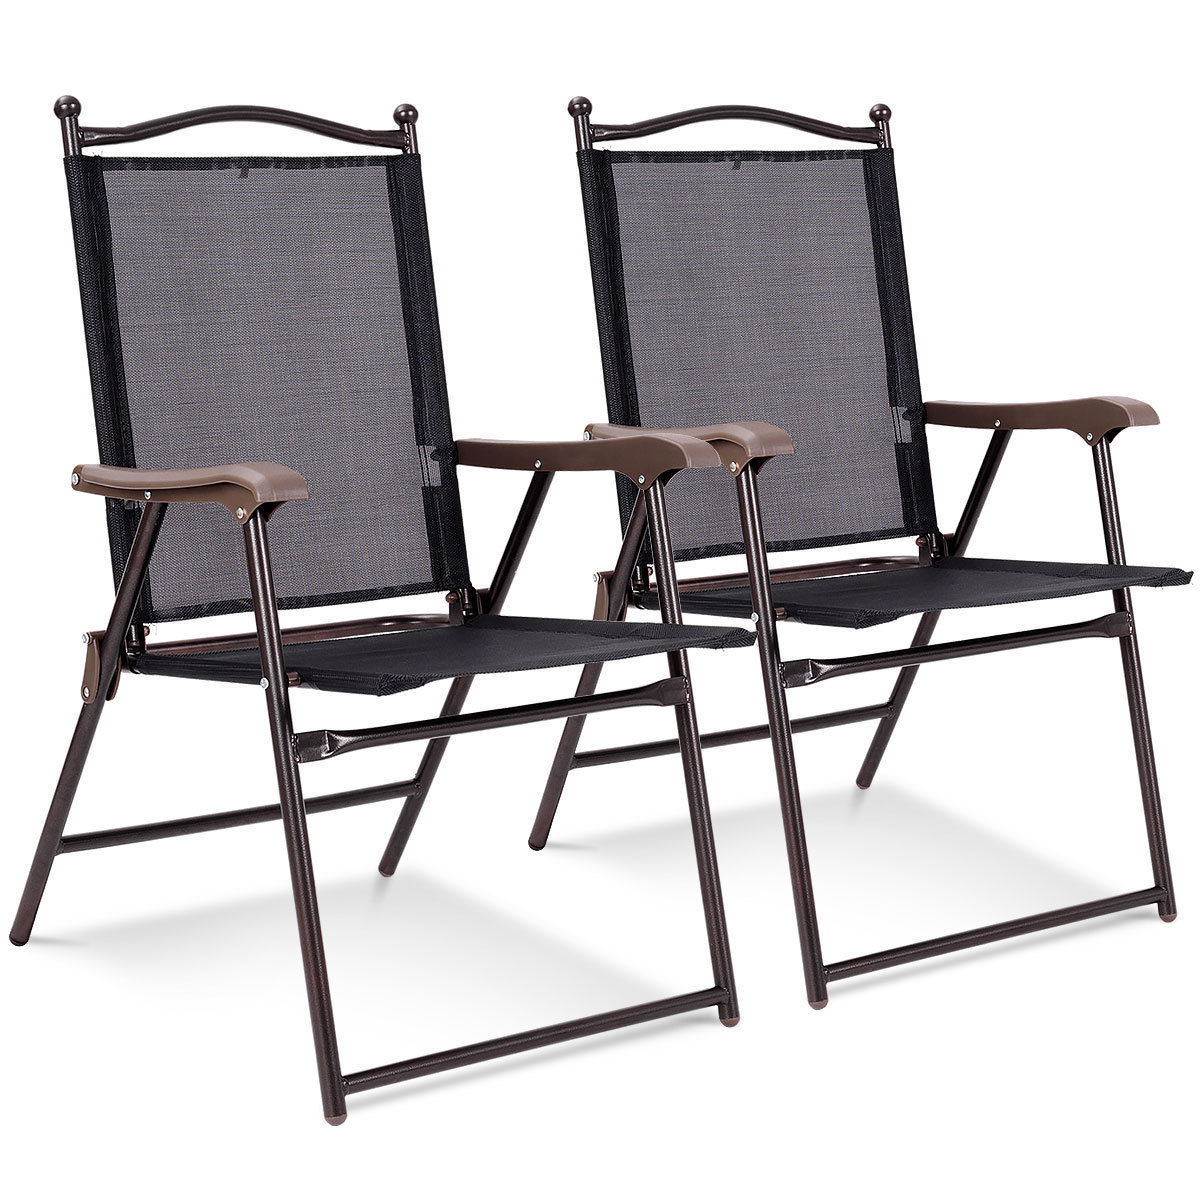 Costway Set of 2 Patio Folding Sling Back Chairs Camping Deck Garden Beach Black - image 1 of 8